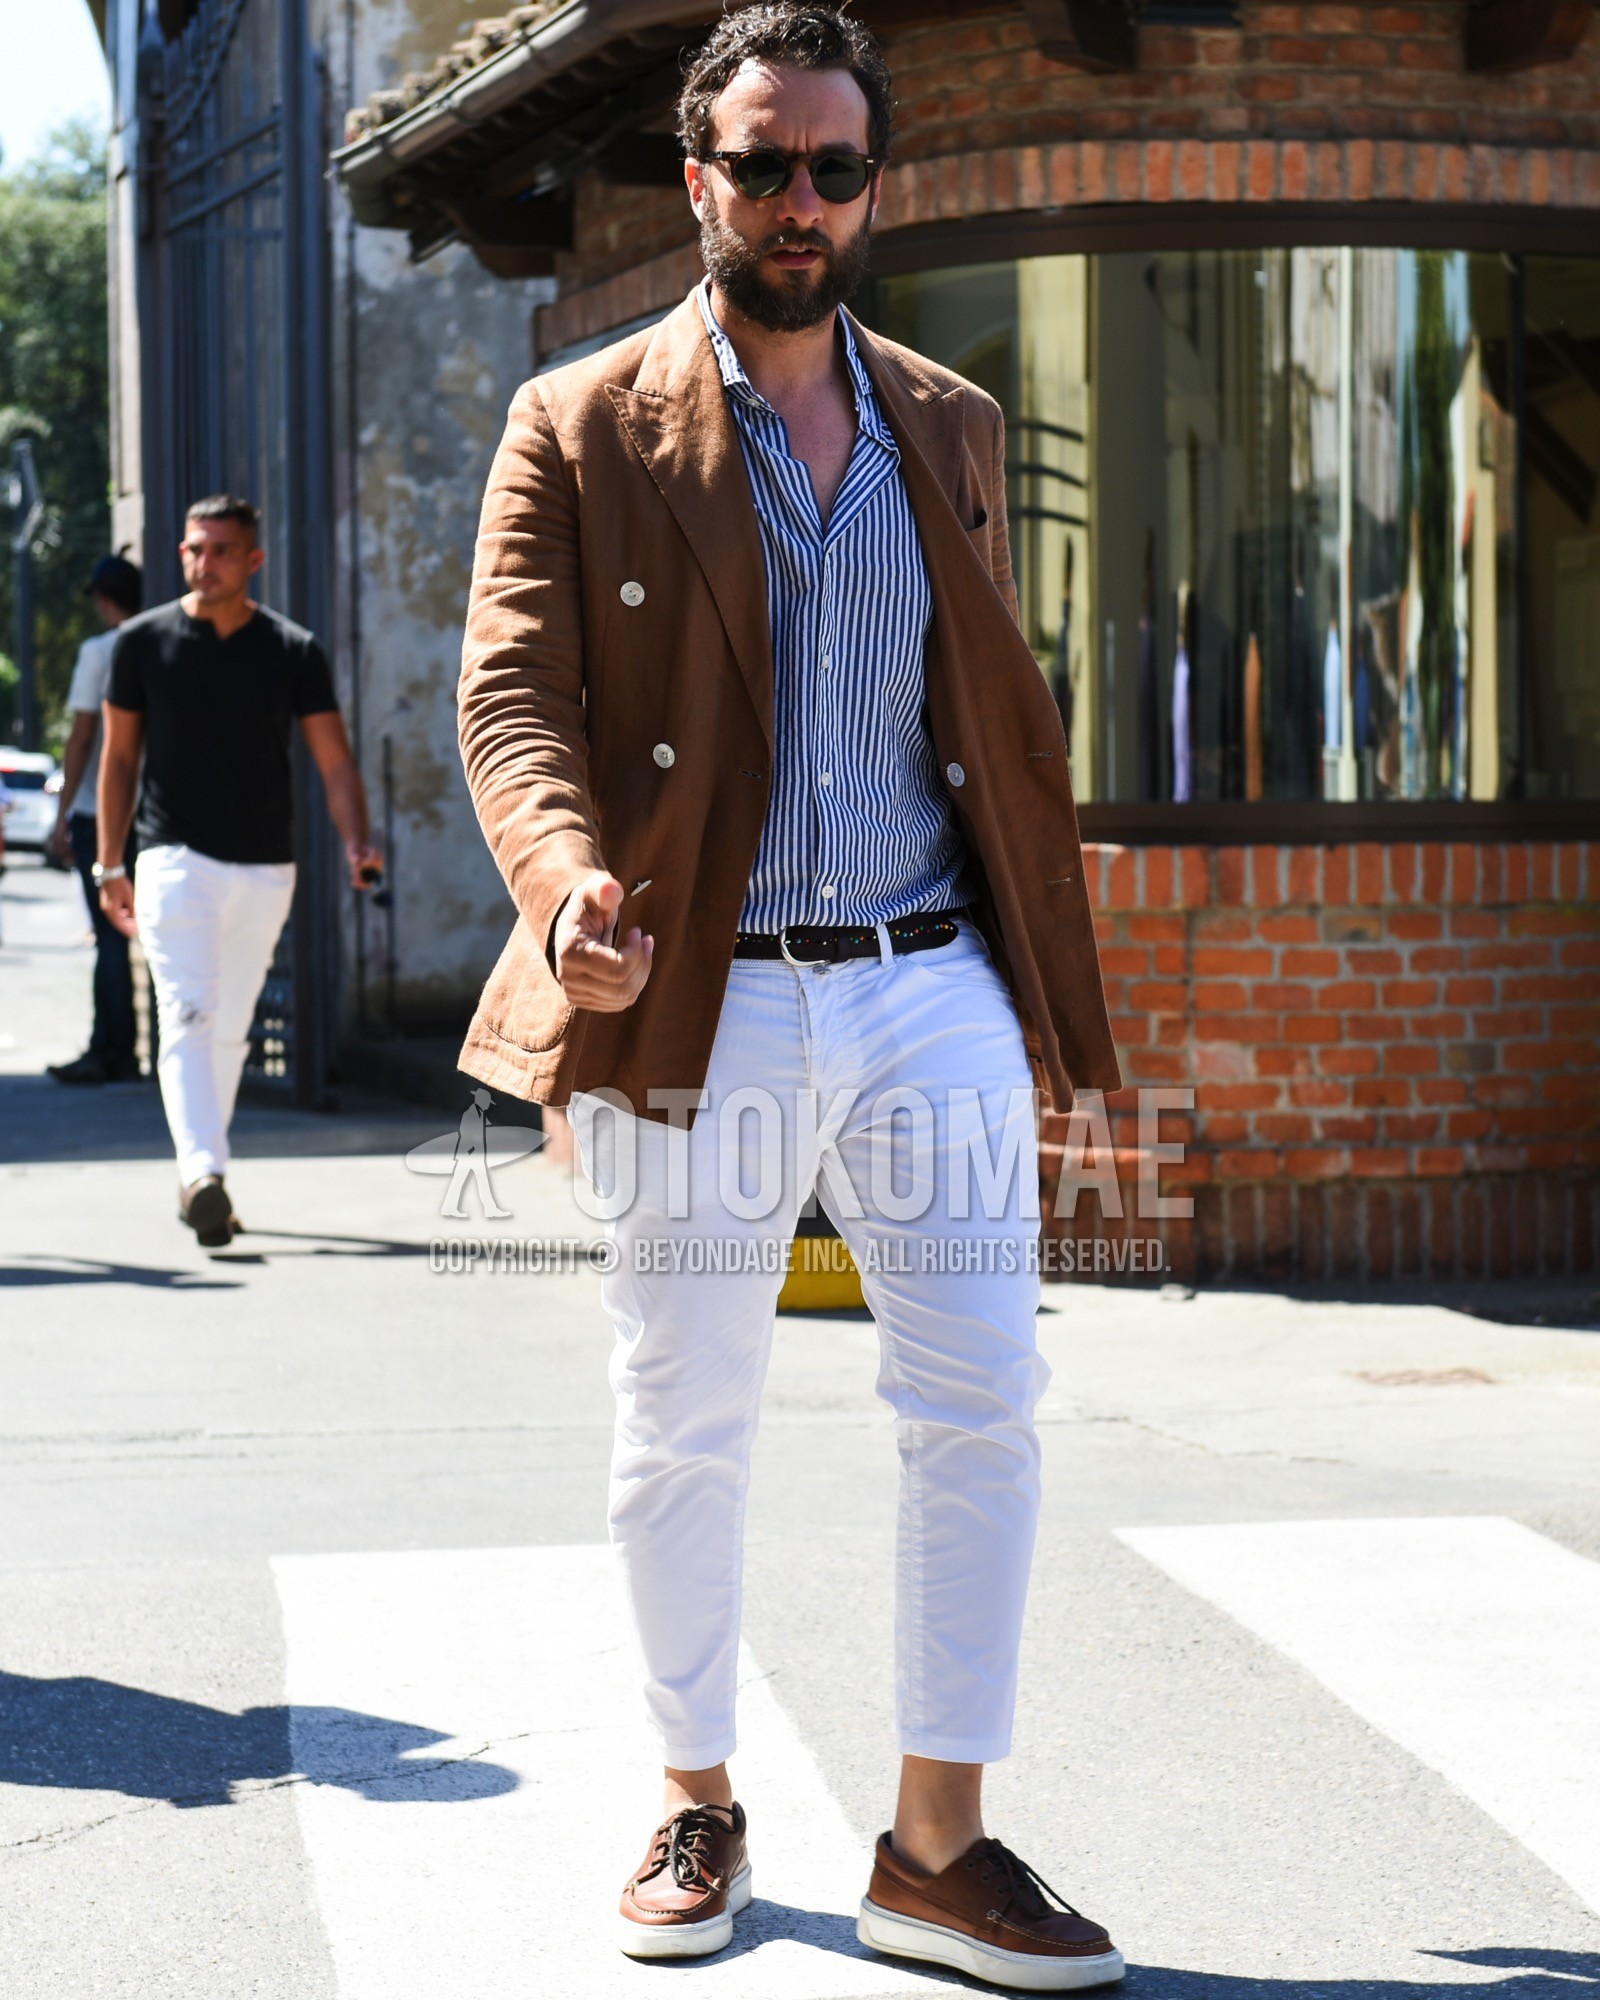 Men's spring summer outfit with brown tortoiseshell sunglasses, brown plain tailored jacket, navy white stripes shirt, black plain leather belt, white plain cotton pants, brown low-cut sneakers.